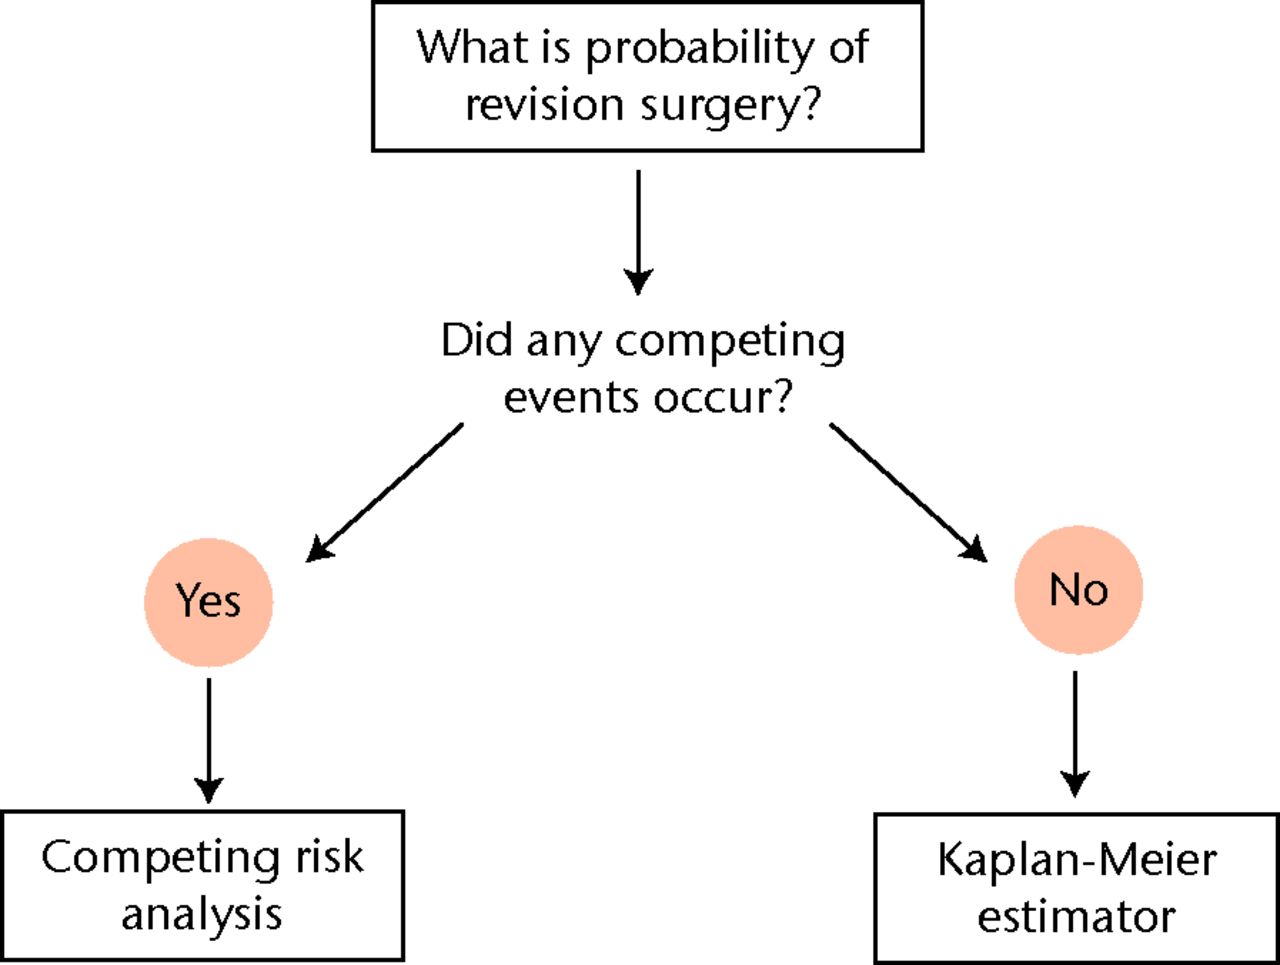 Fig. 4 
          Algorithm detailing the appropriate
data analysis technique to estimate the probability of revision
surgery. The possibility and actual occurrence of competing events
should be assessed in order to determine the appropriate data analysis
technique.
        